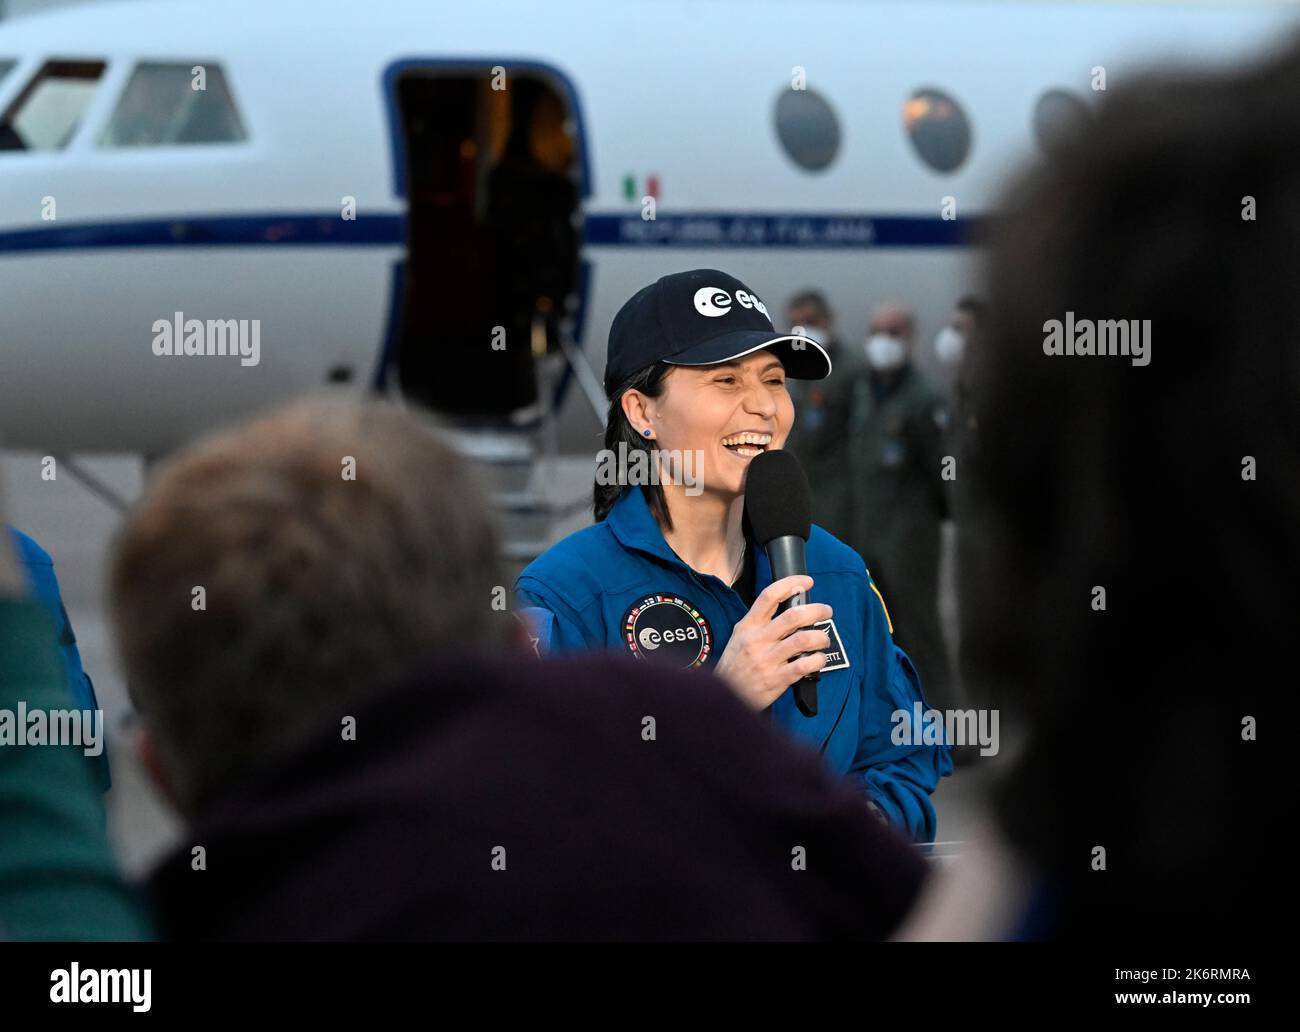 Cologne, Germany. 15th Oct, 2022. Italian astronaut Samantha Cristoforetti speaks to the press at the military section of Cologne/Bonn Airport after her arrival. The astronaut was the first woman from Europe to hold the role of commander of the International Space Station (ISS) in September 2022. Upon her arrival, she was greeted by ESA staff and family. Credit: Roberto Pfeil/dpa/Alamy Live News Stock Photo